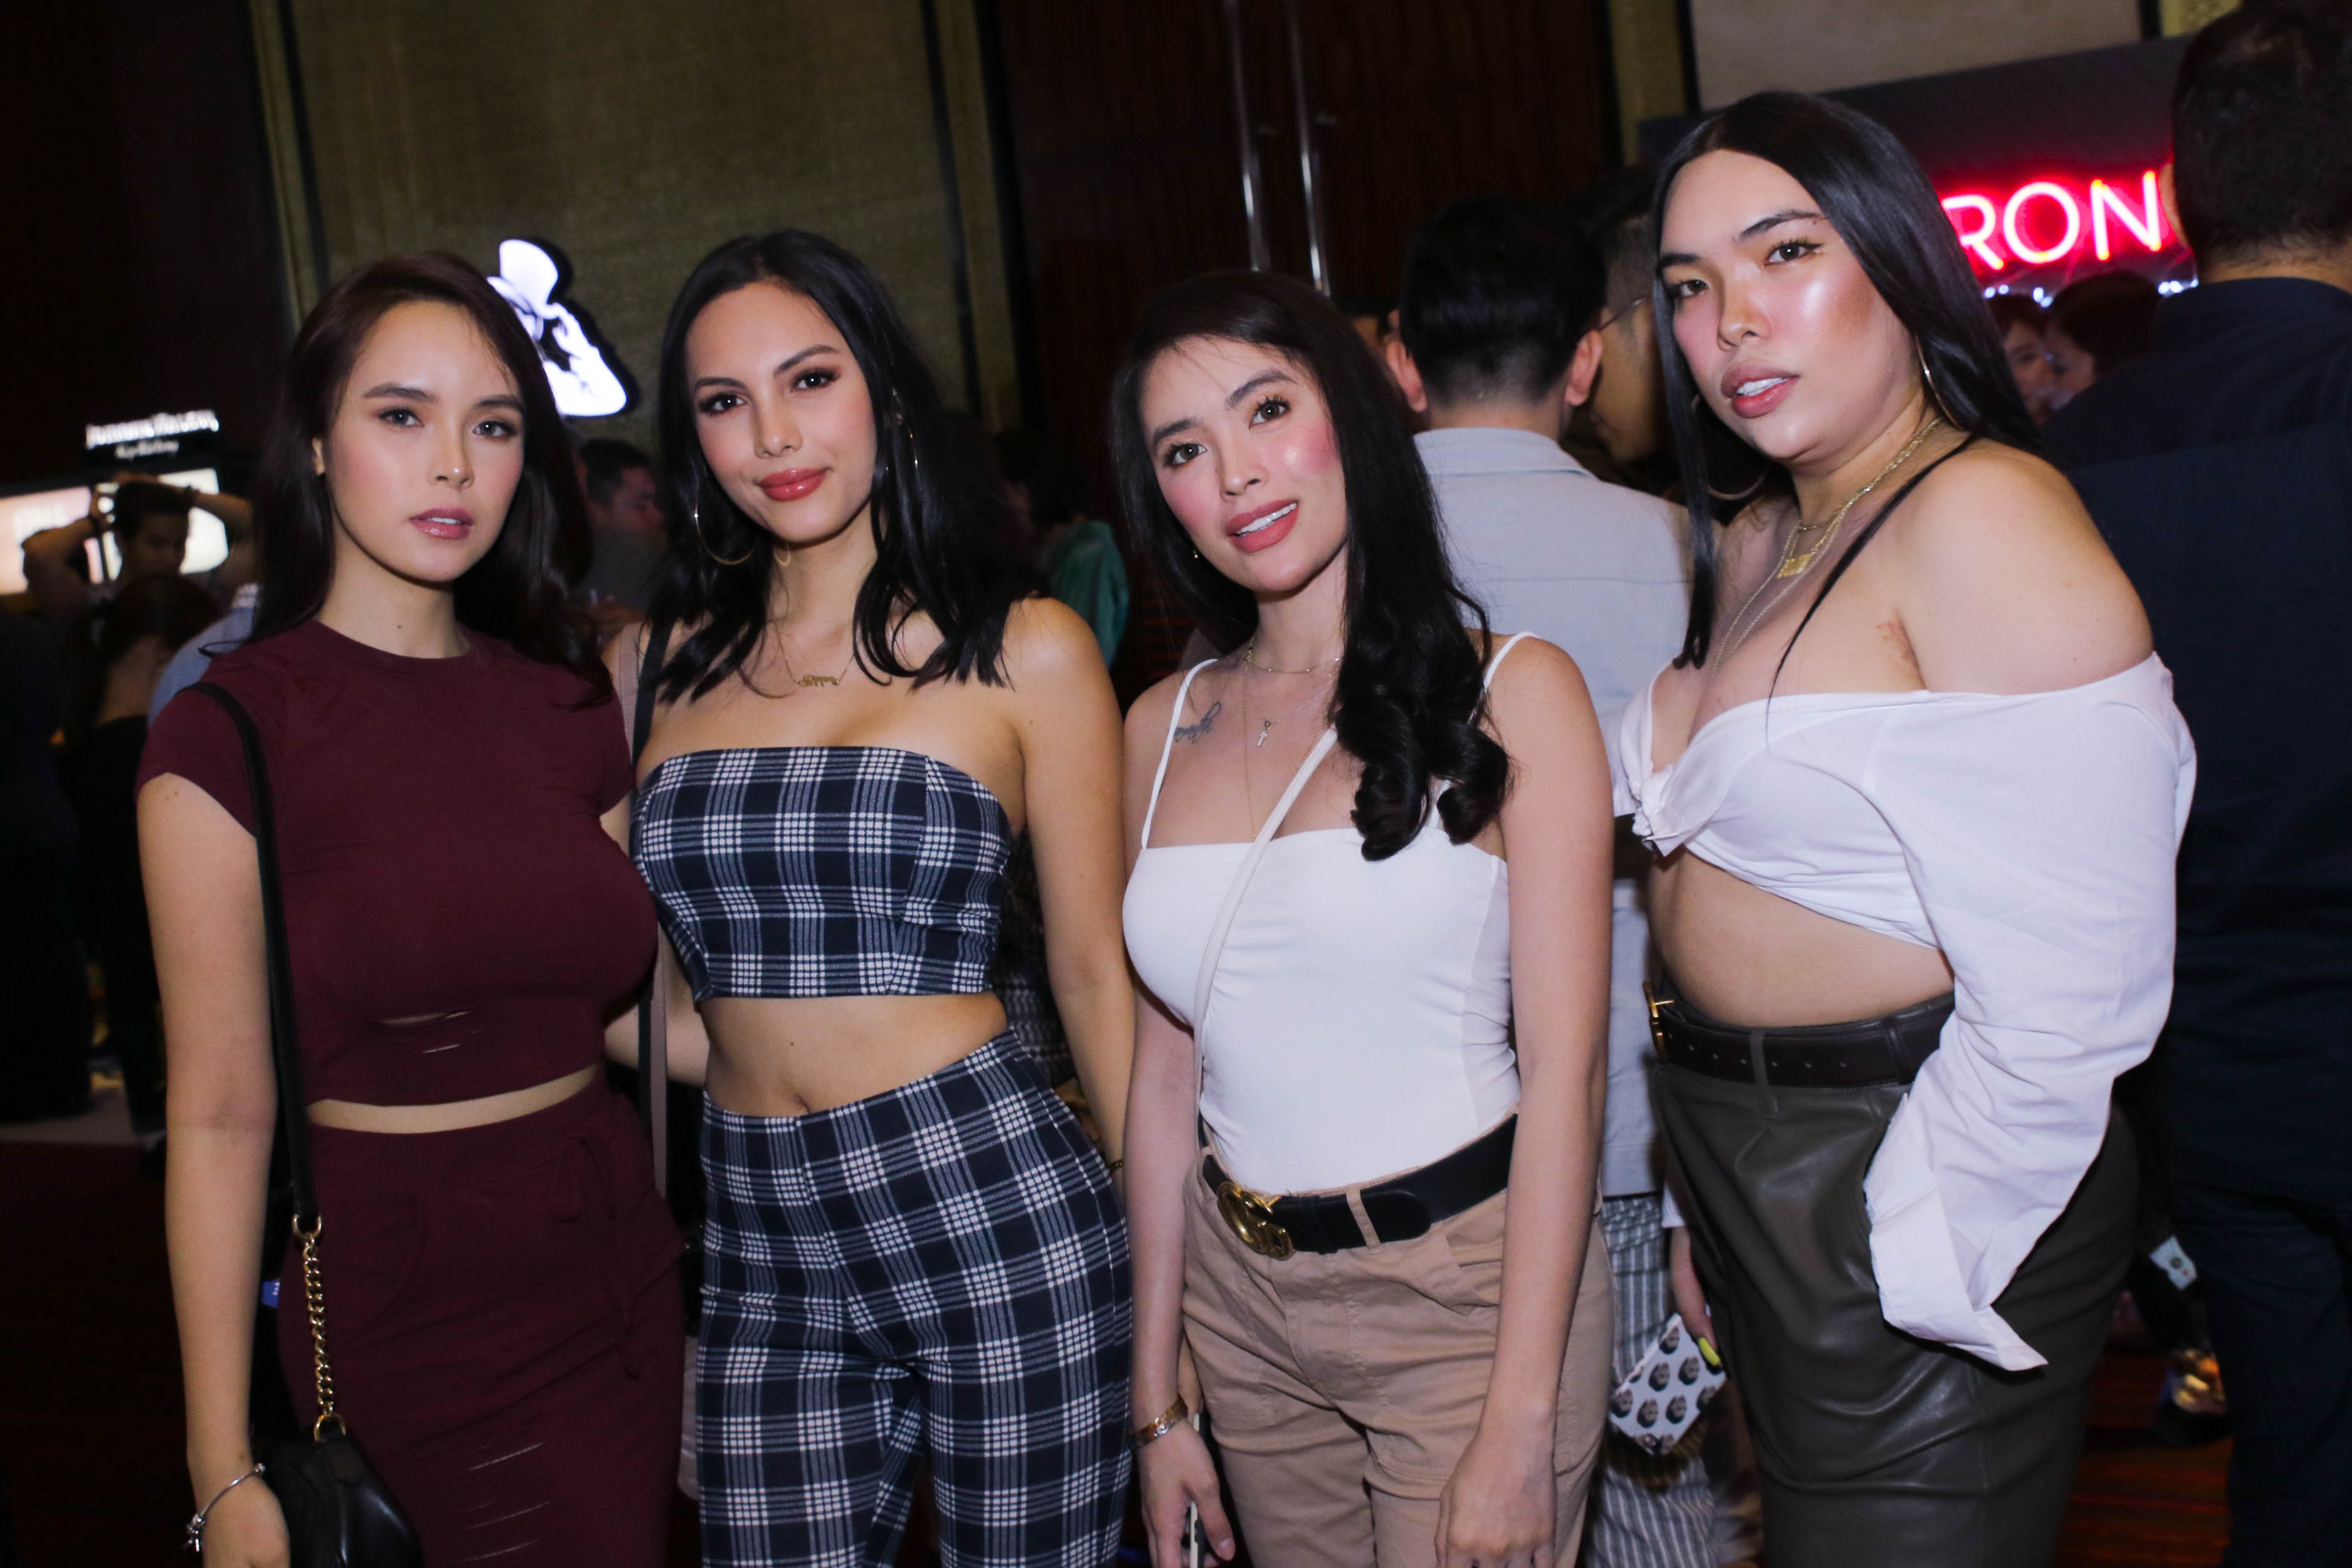 stylefestph: Here's What Went Down at the stylesocials After Parties